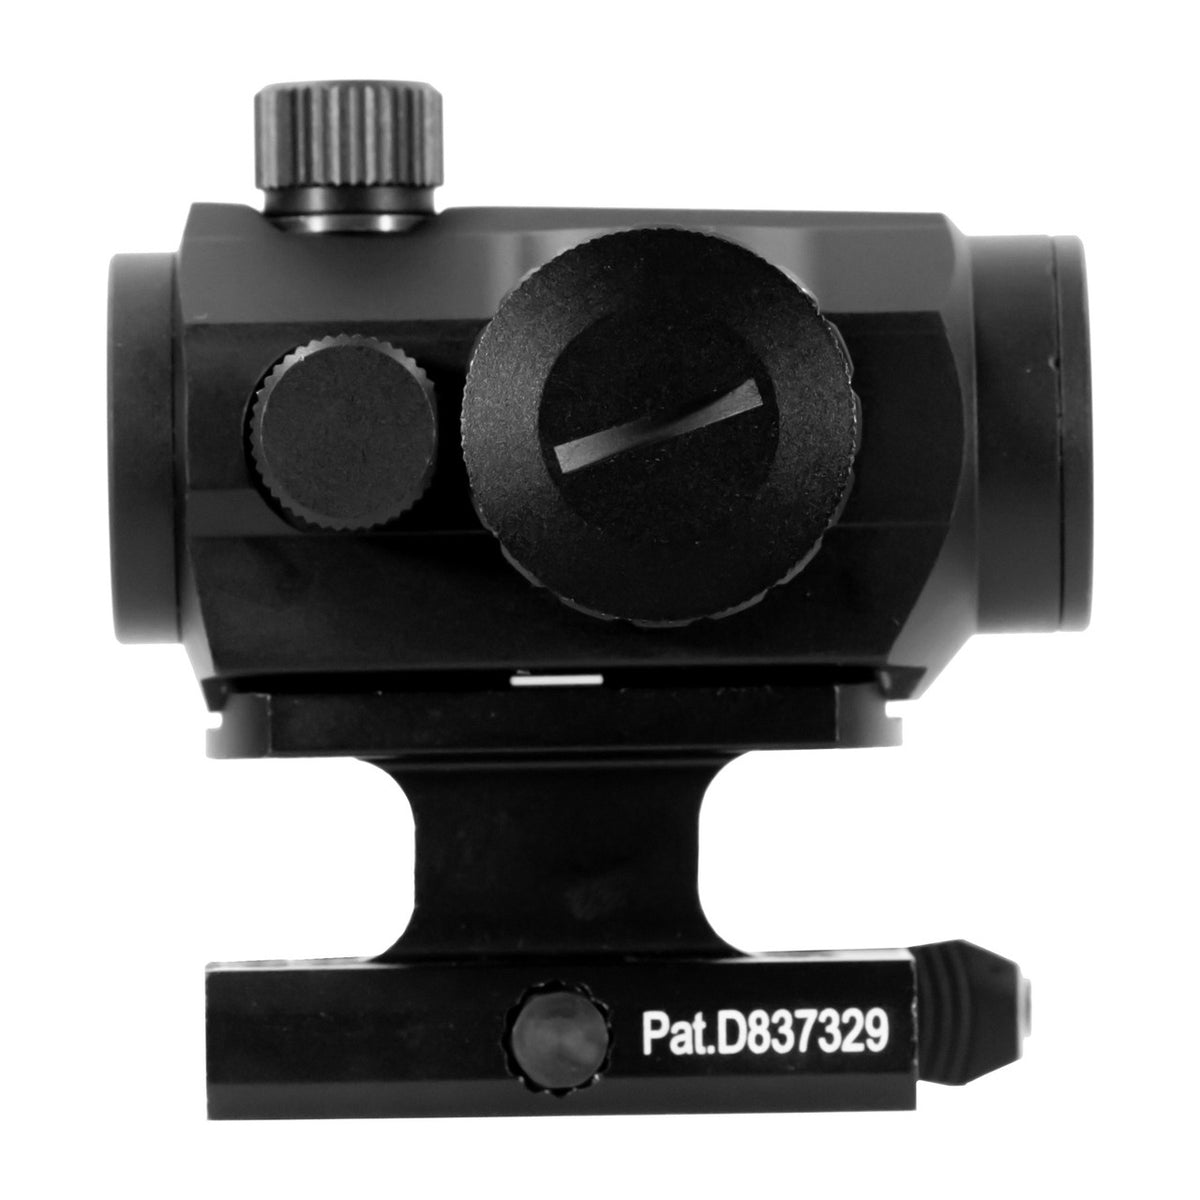 AIM 1x20 Red Dot w- Quick Release Mount